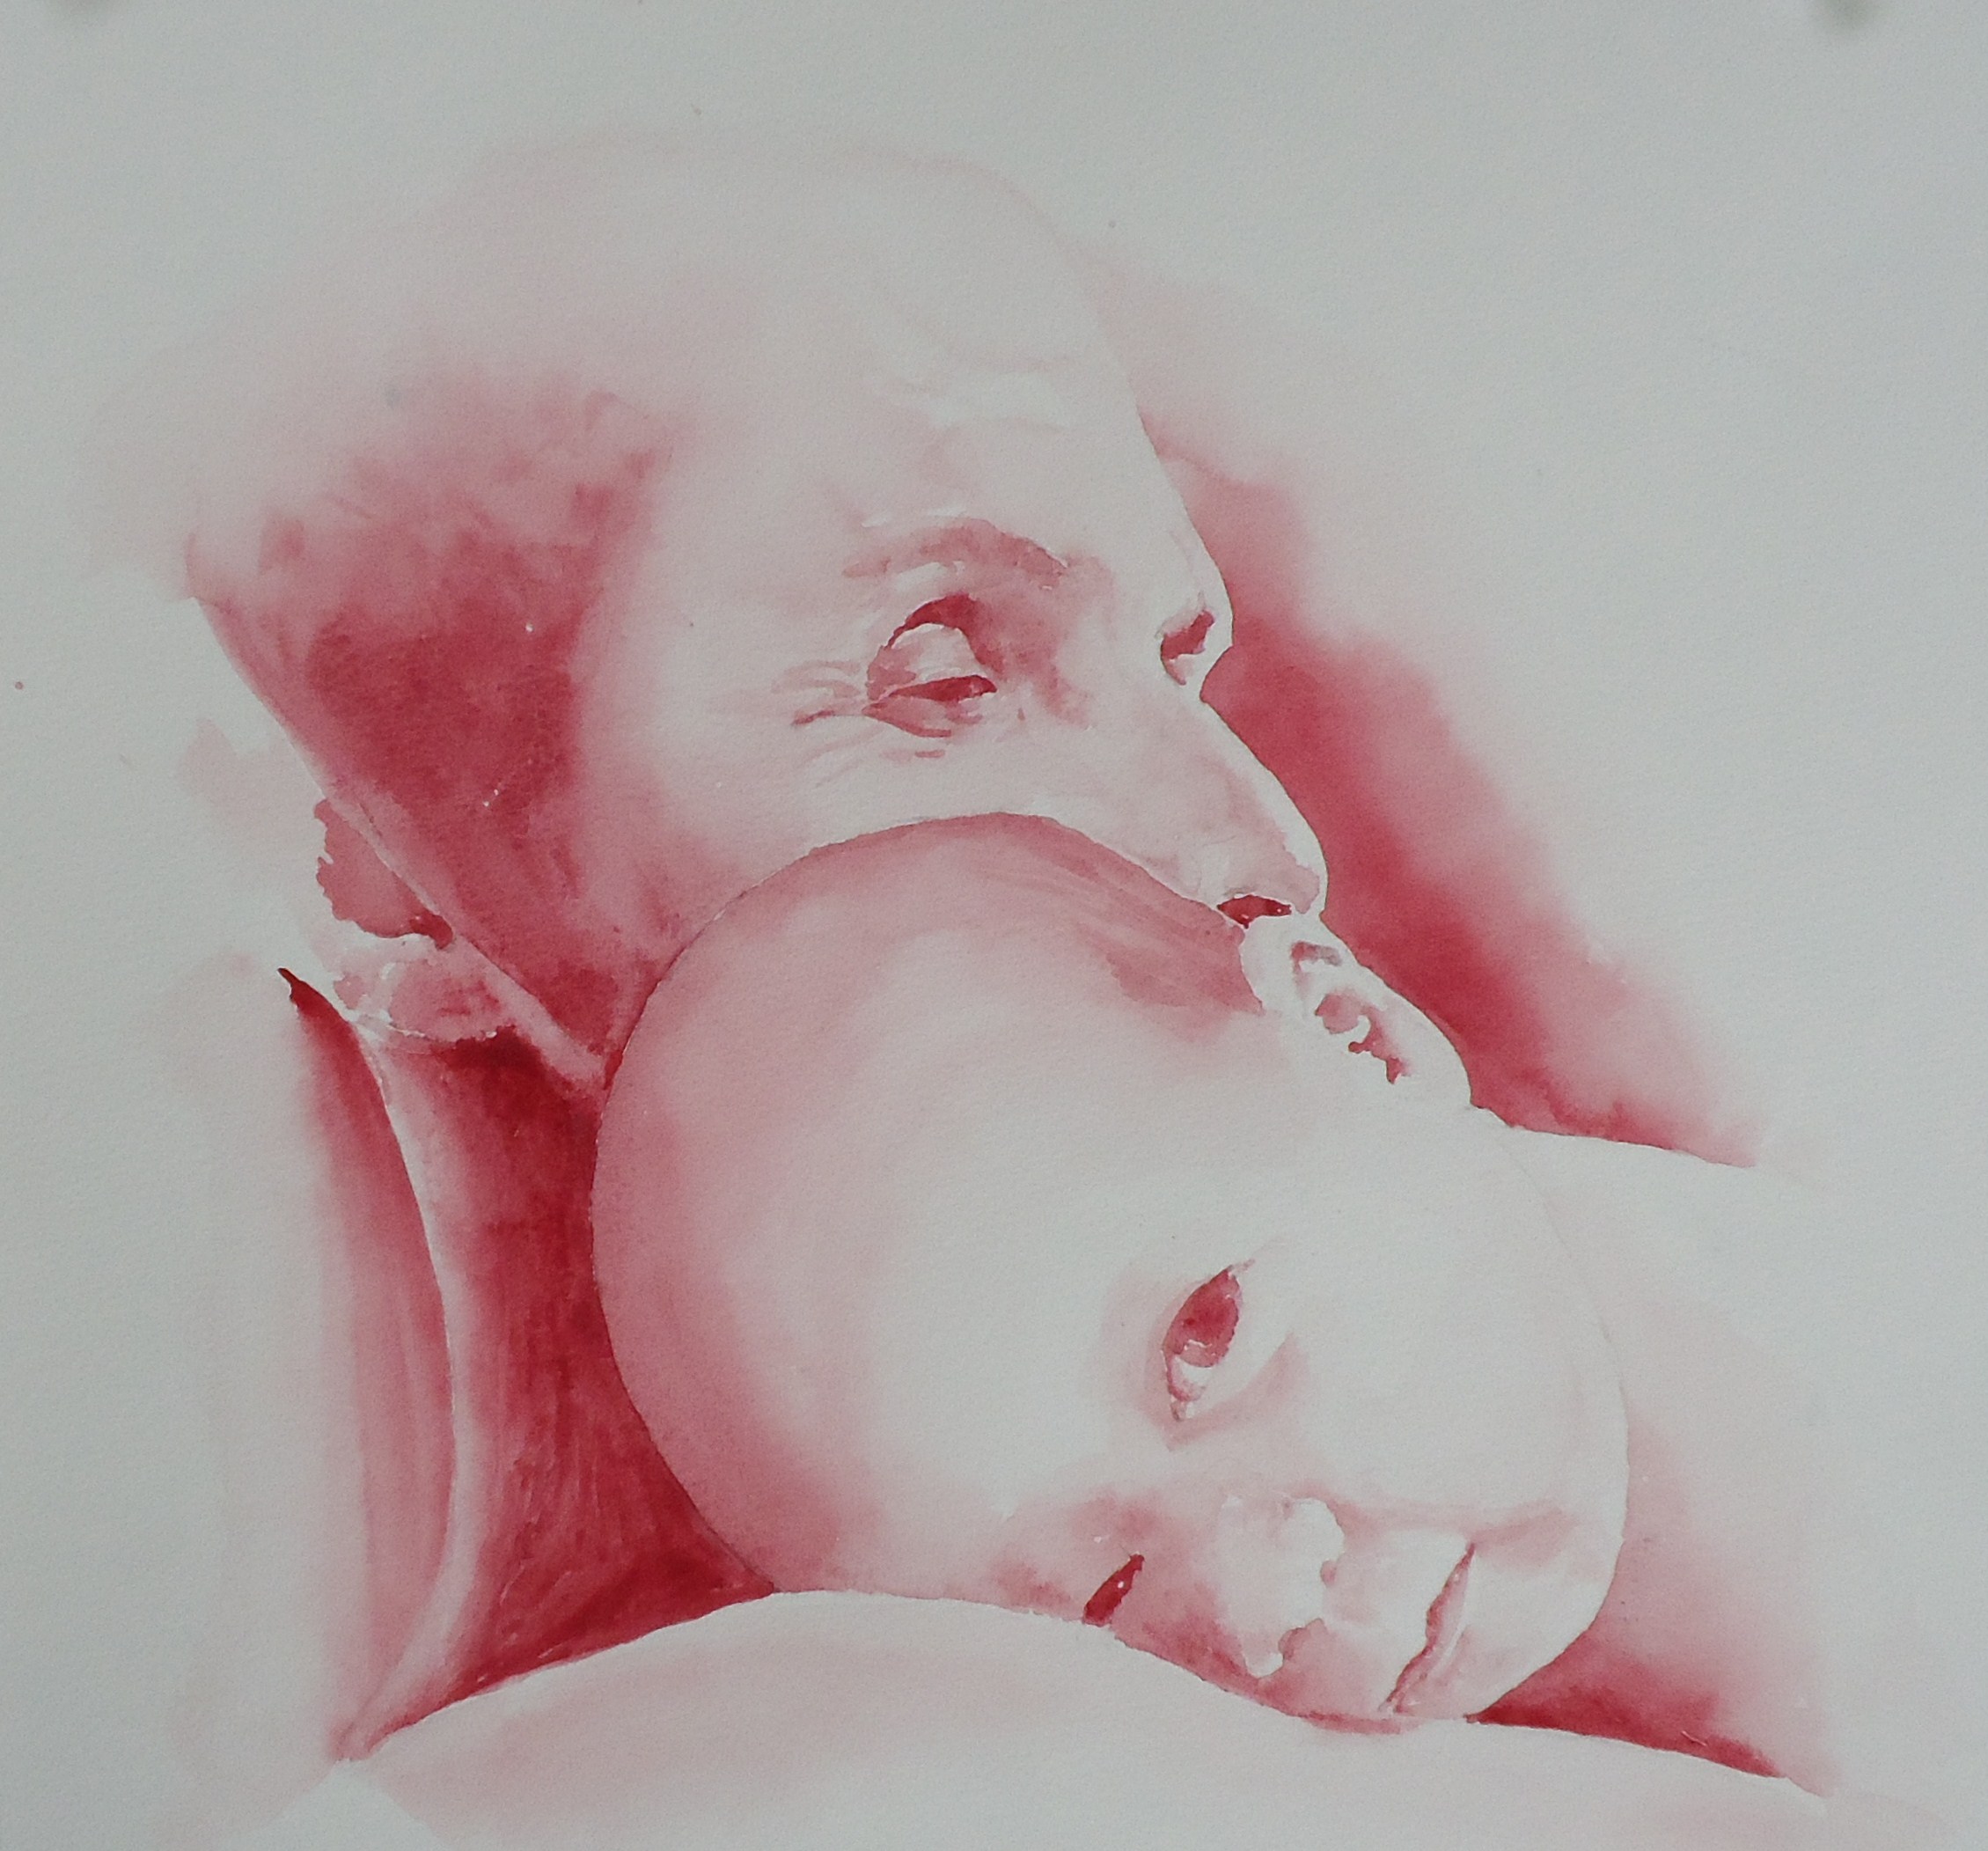 A painting of a woman holding a baby done in red watercolour by Keith Cains.